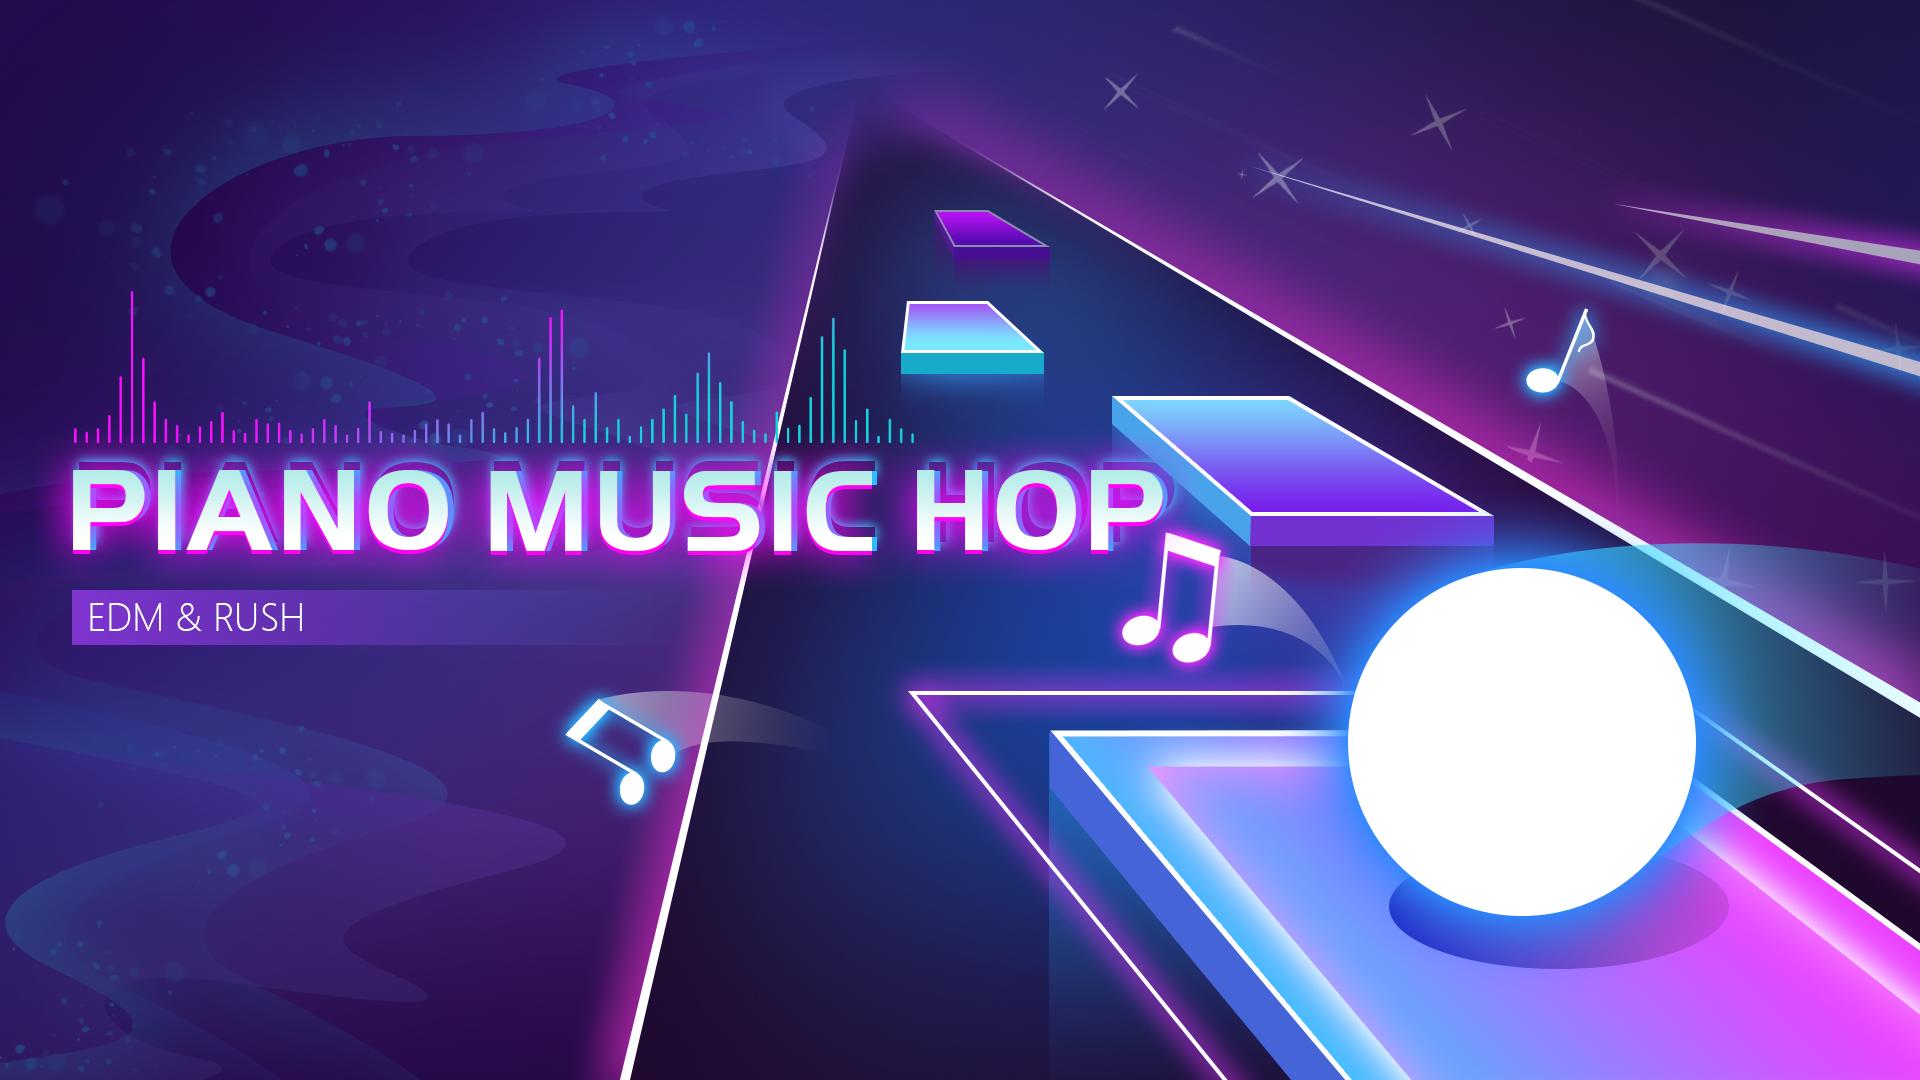 Piano Beat - EDM Music Tiles para Android - Download